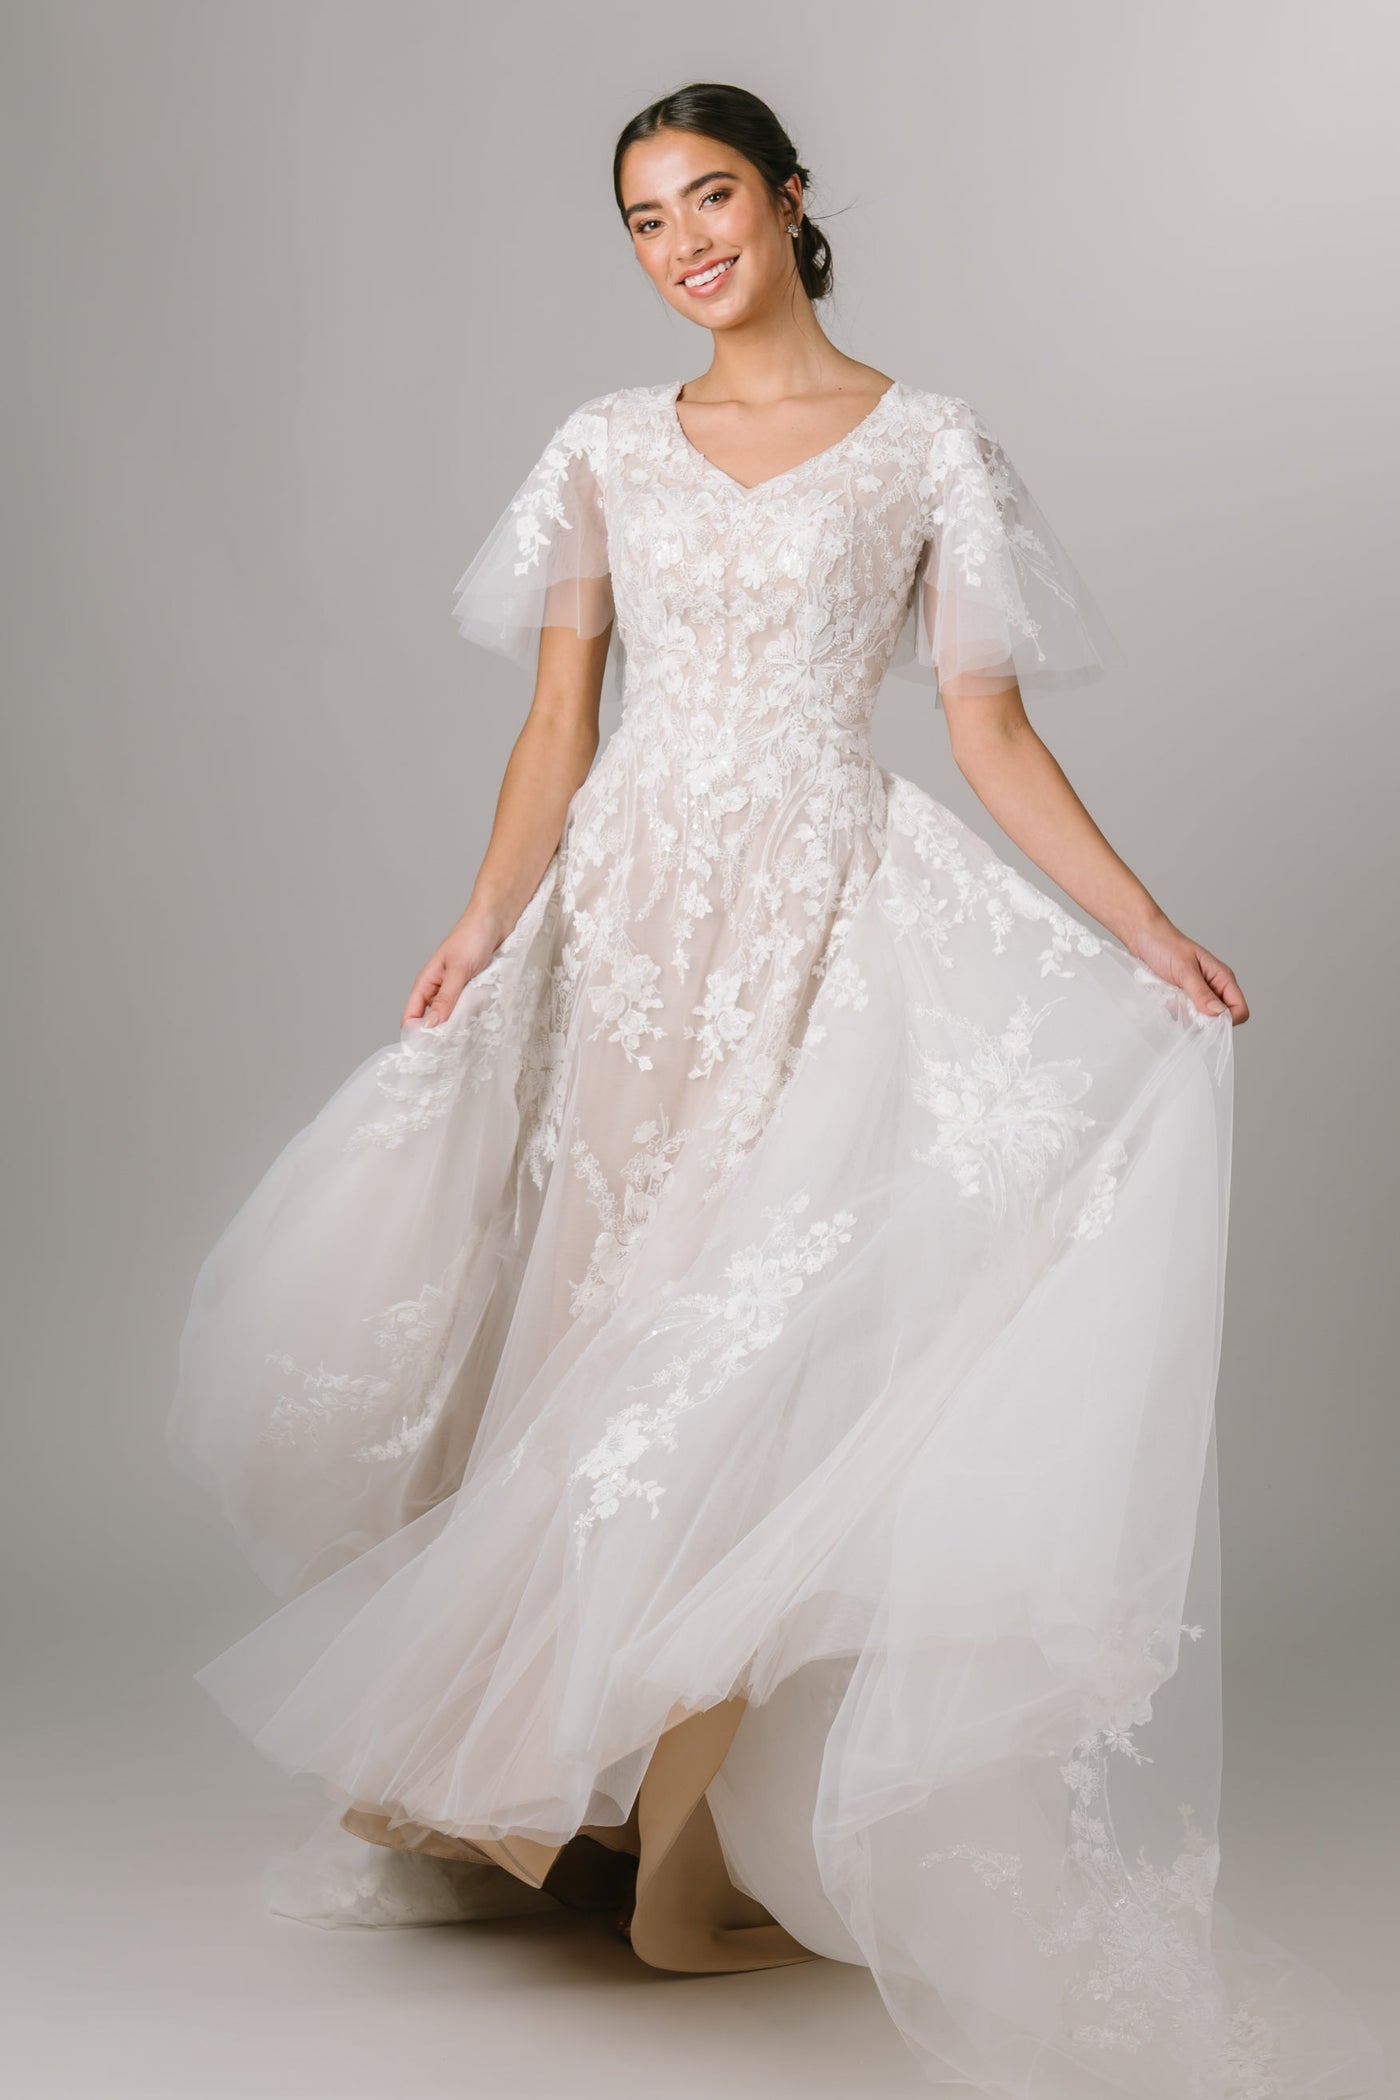 This Modest Dress features flutter sleeves, 3D lace appliques and an a soft ballgown fit. - Modest Wedding Dress - Modest Dresses - LDS Wedding Dress - LatterDayBride